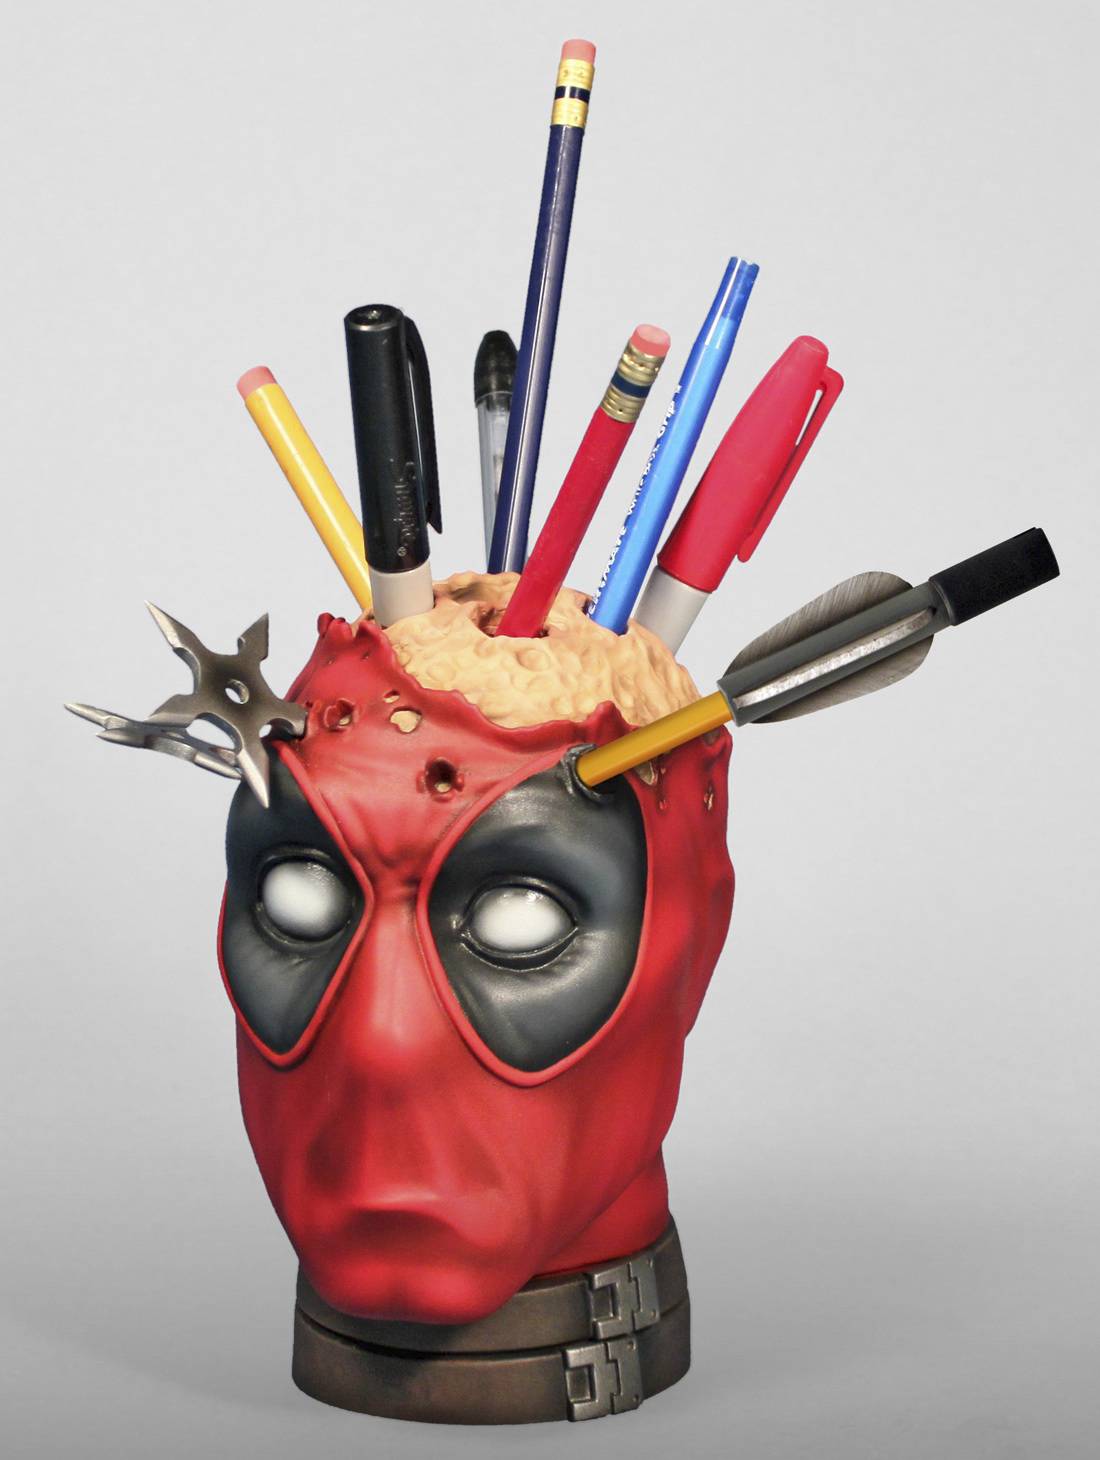 Deadpool has the power of accelerated healing, so getting stabbed in the head by a bunch of pens and pencils is no big deal to him. Buy this <a href="http://ebaum.it/1qNthcR" target="_blank">Deadpool Pencil Holder</a>.